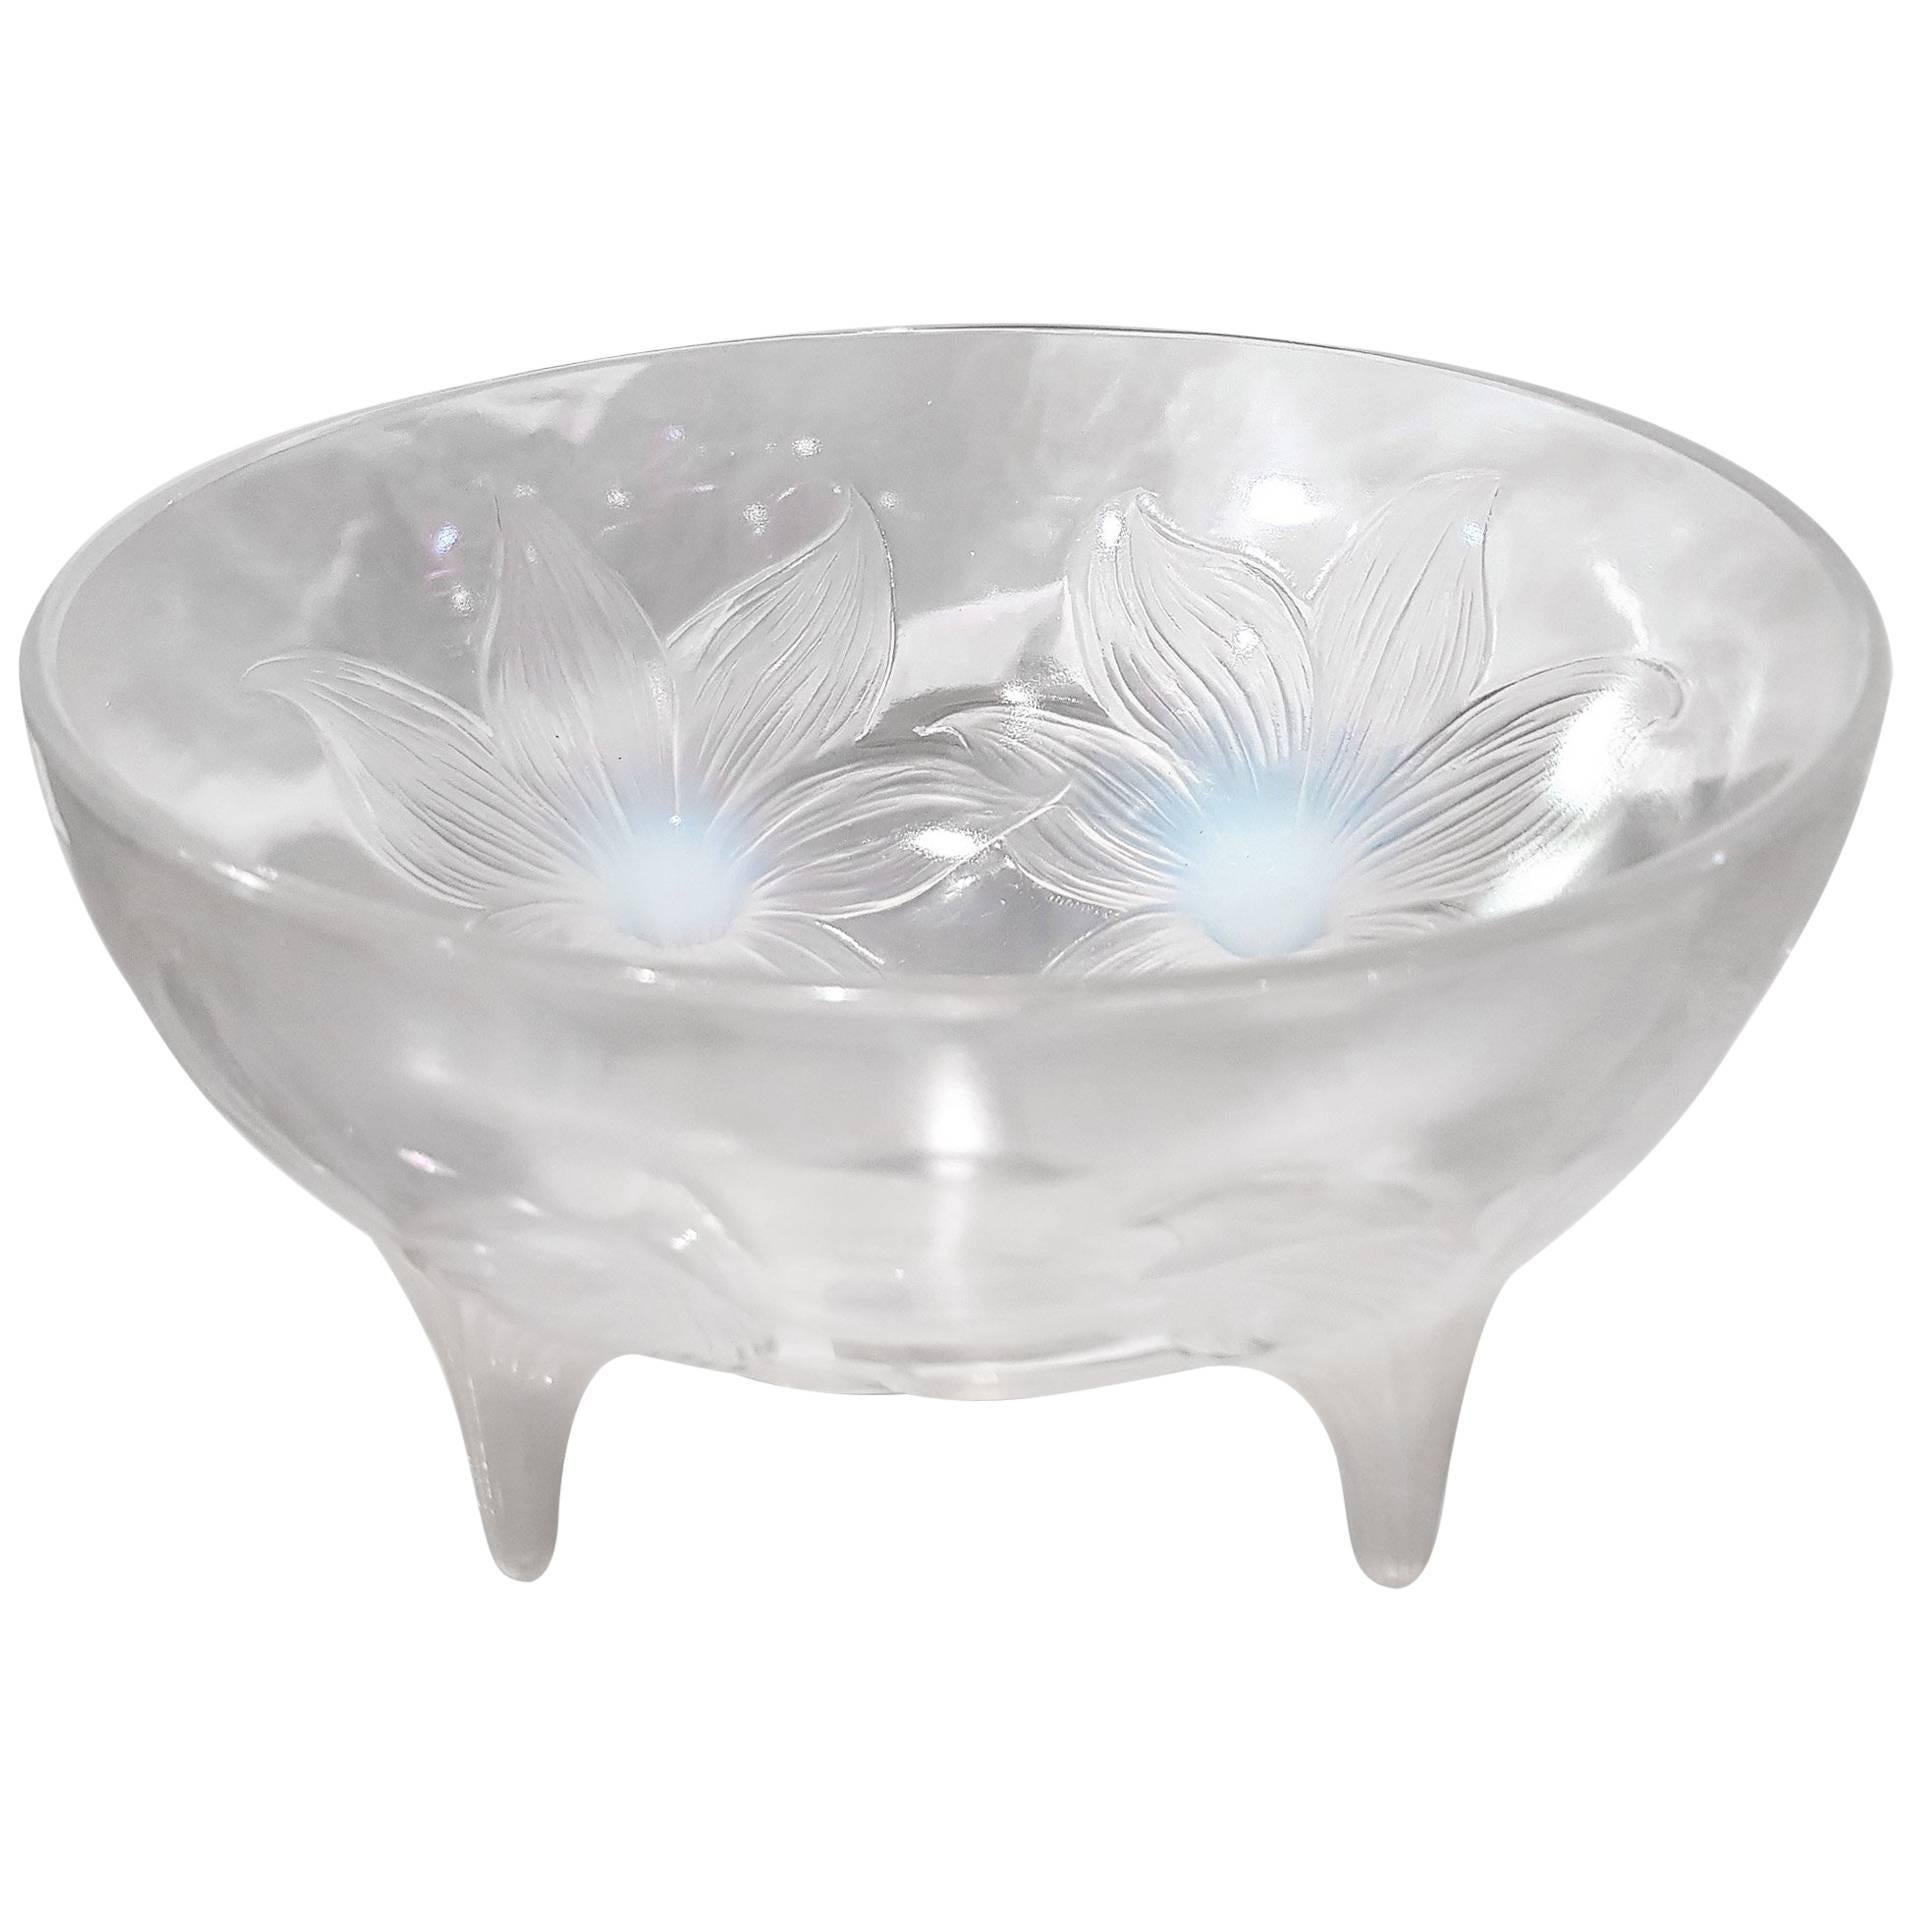 'Lys', Art Deco Bowl by Rene Lalique in Opalescent Glass